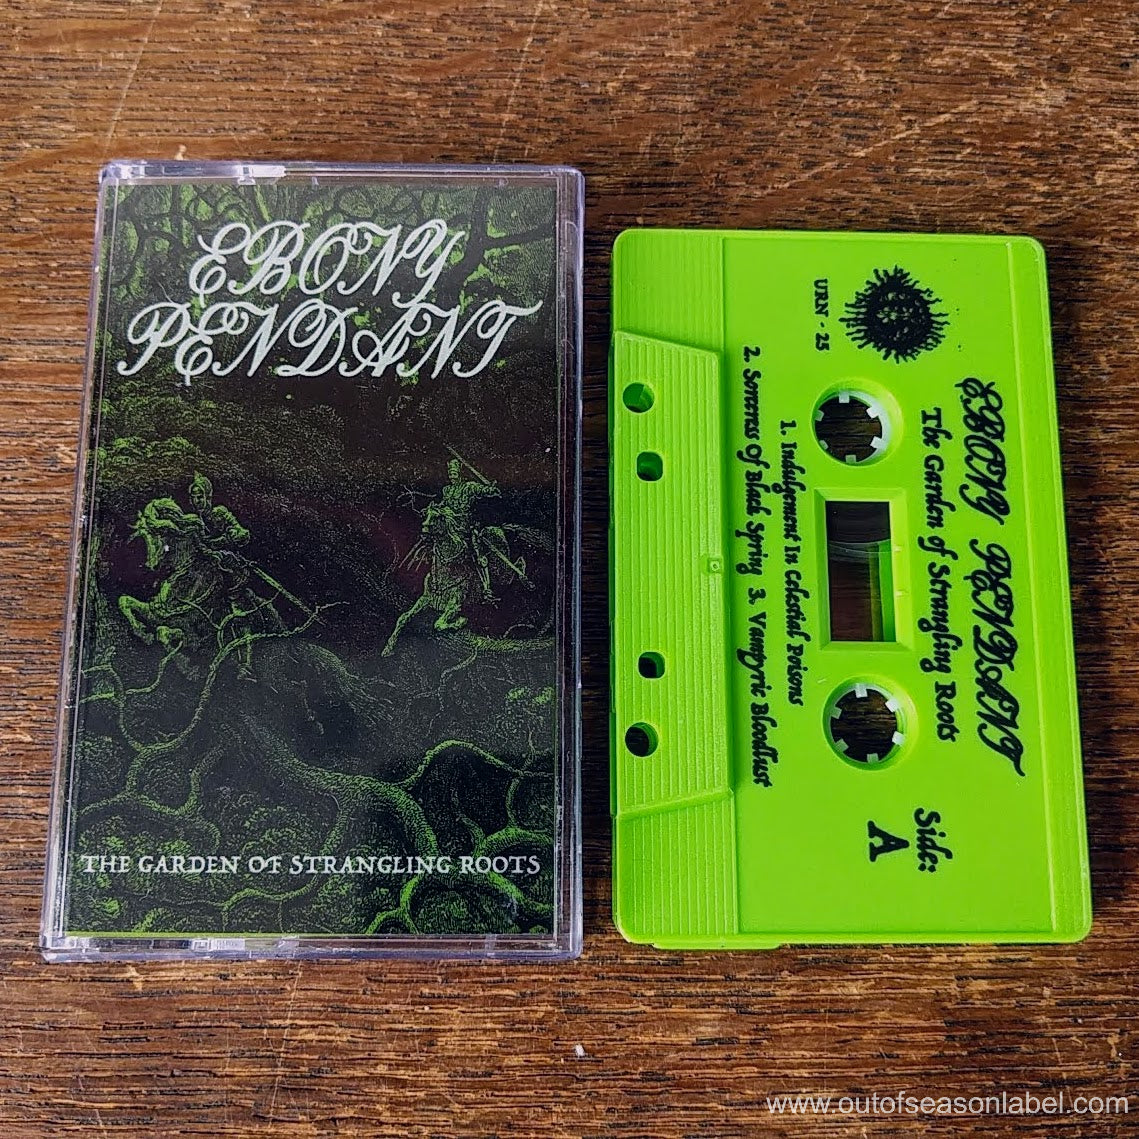 [SOLD OUT] EBONY PENDANT "The Garden of Strangling Roots" Cassette Tape